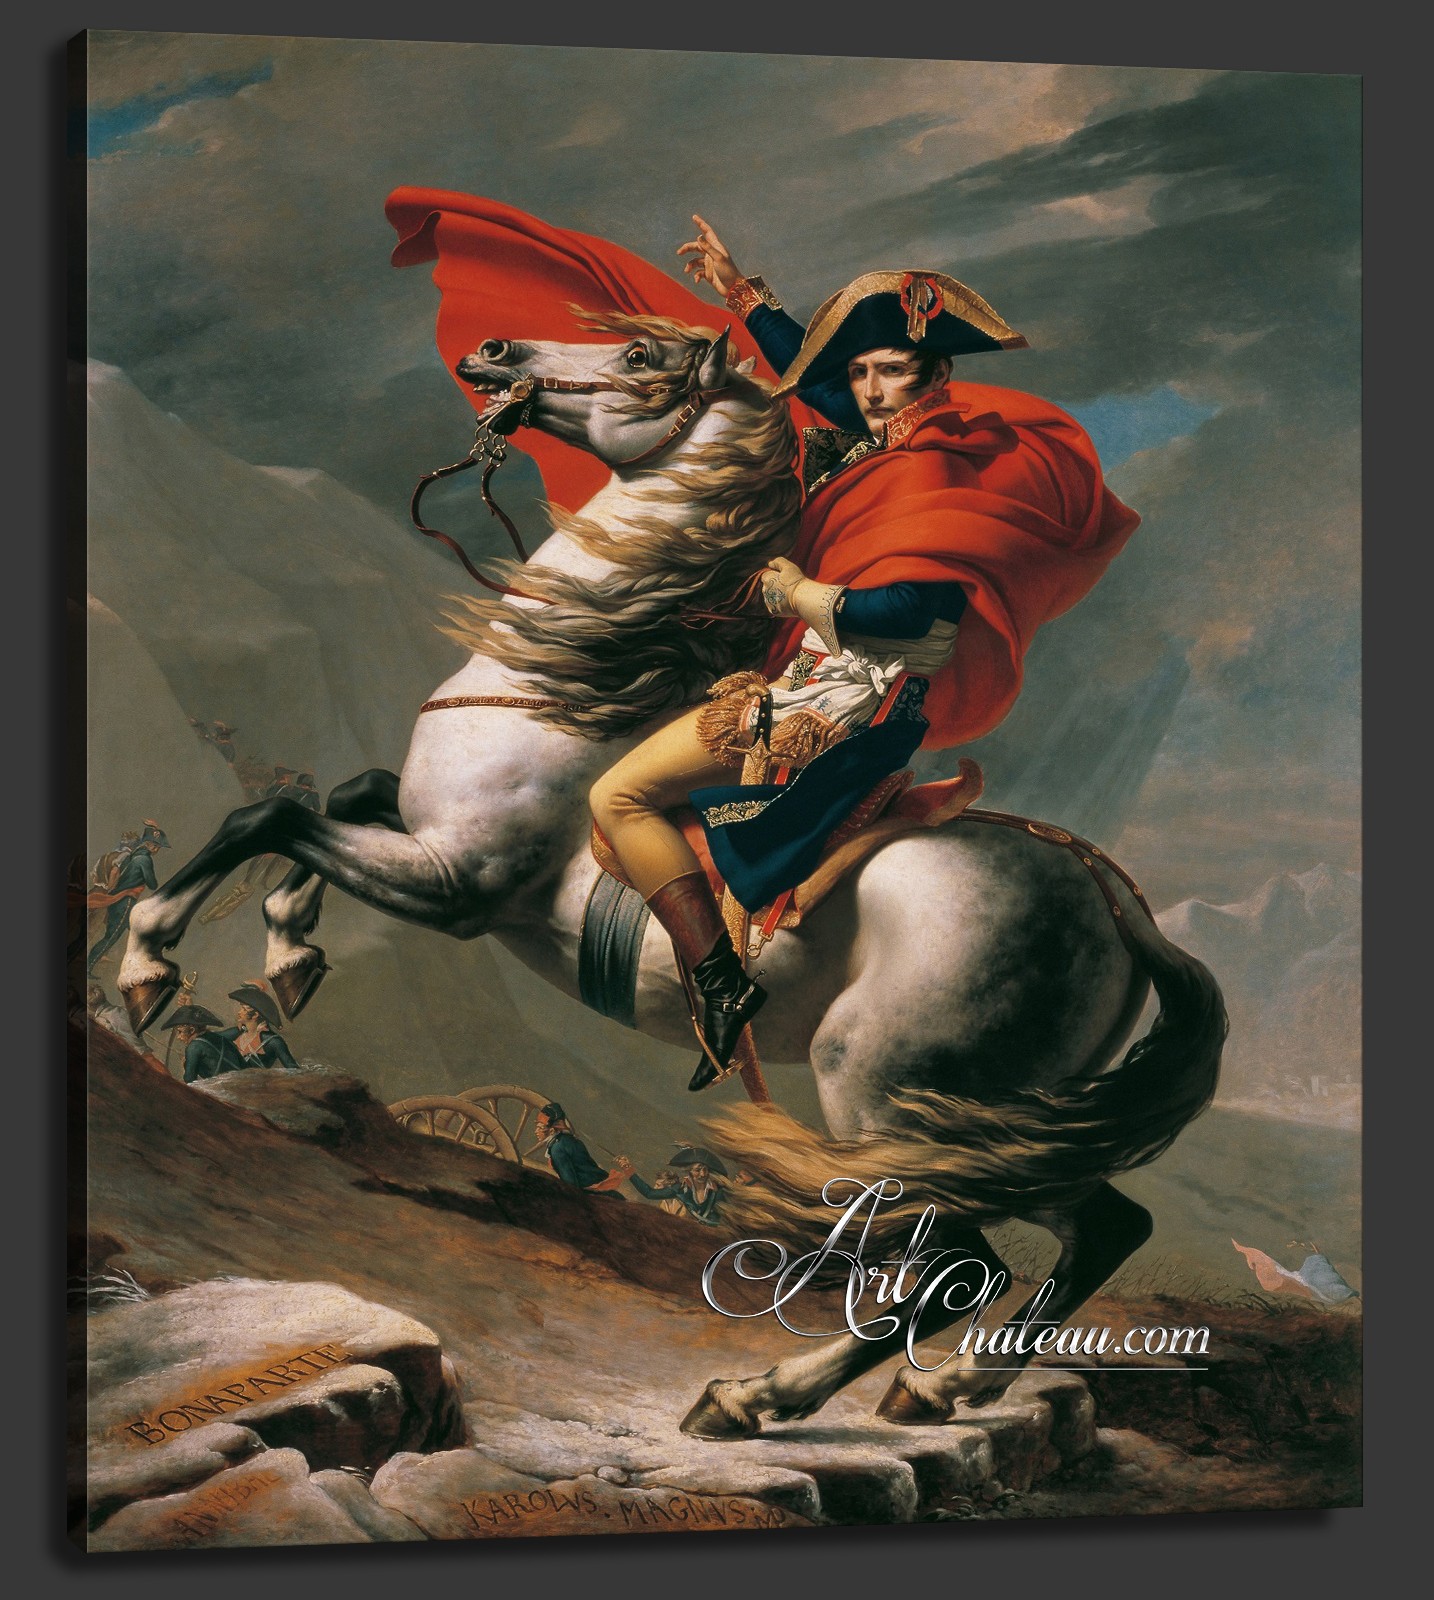 Napoleon Crossing the Alps, after Jacques Louis David